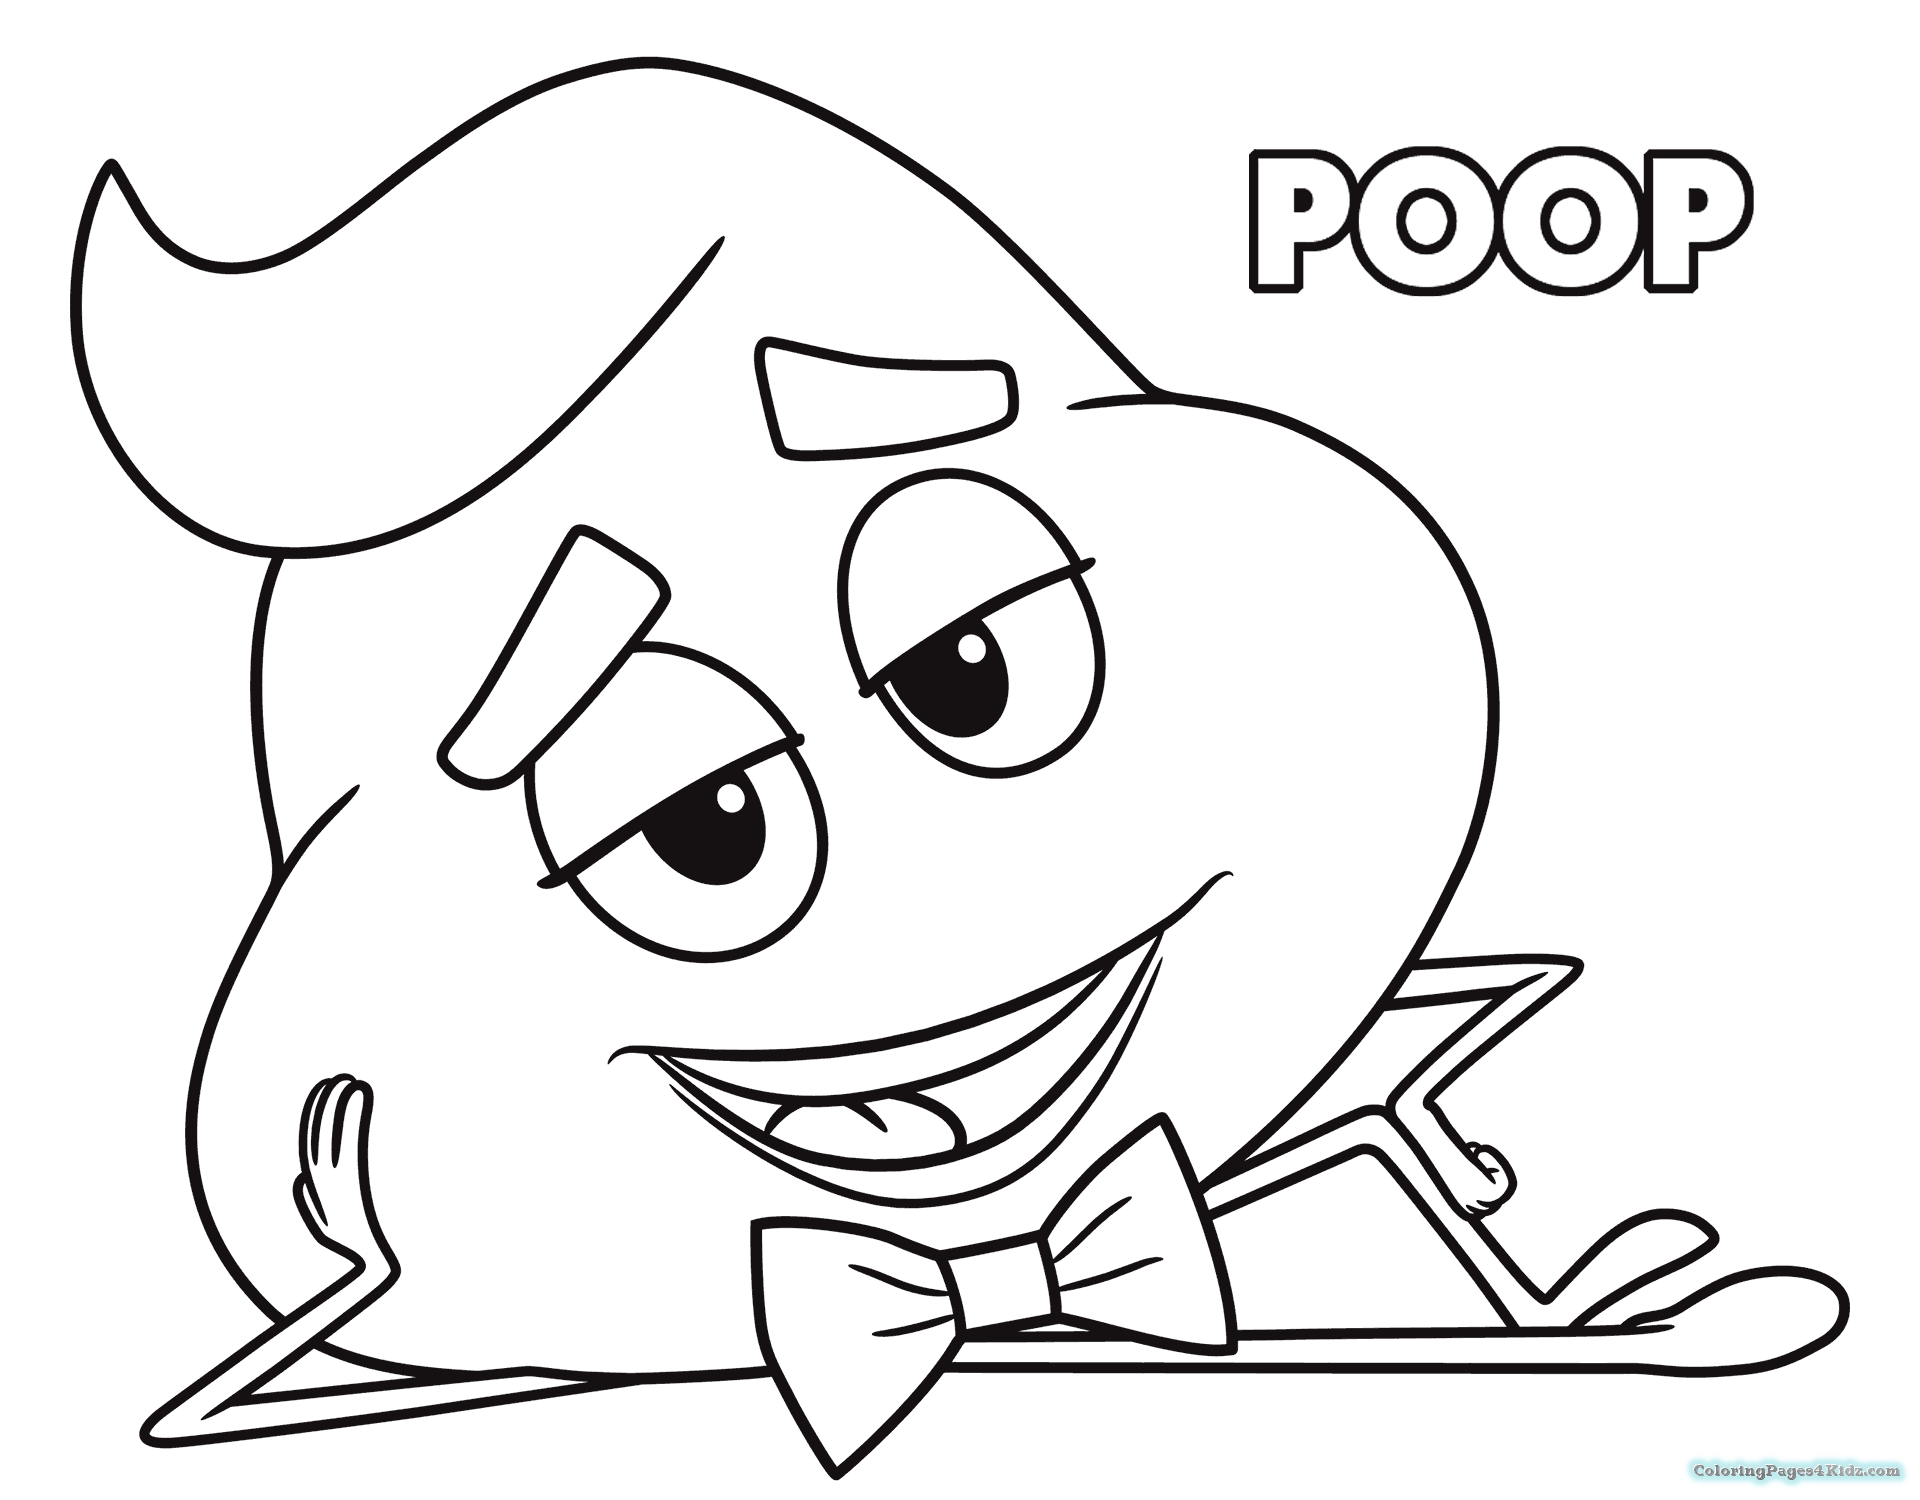 Emoji Poop Coloring Pages At GetColorings Free Printable Colorings Pages To Print And Color